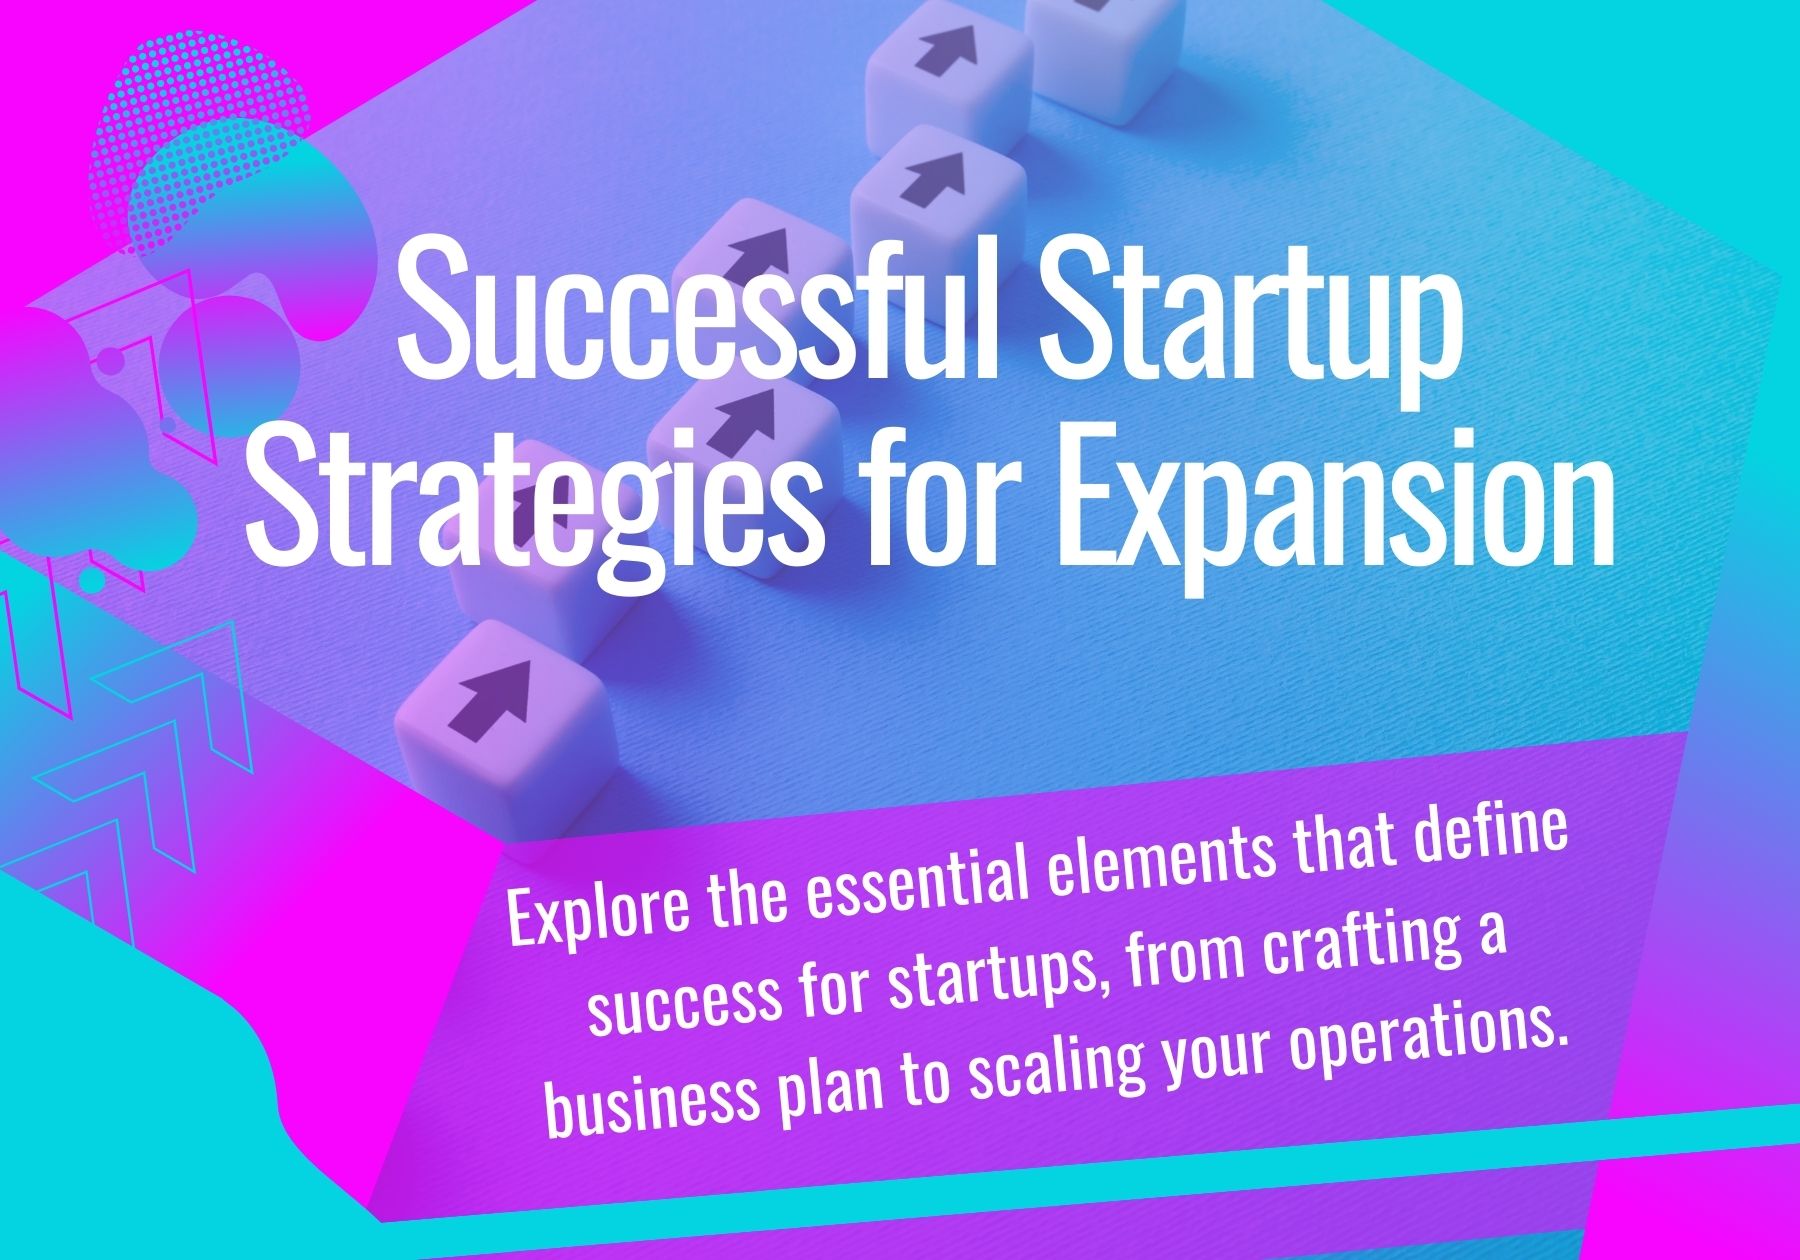 Successful Startup Strategies for Expansion